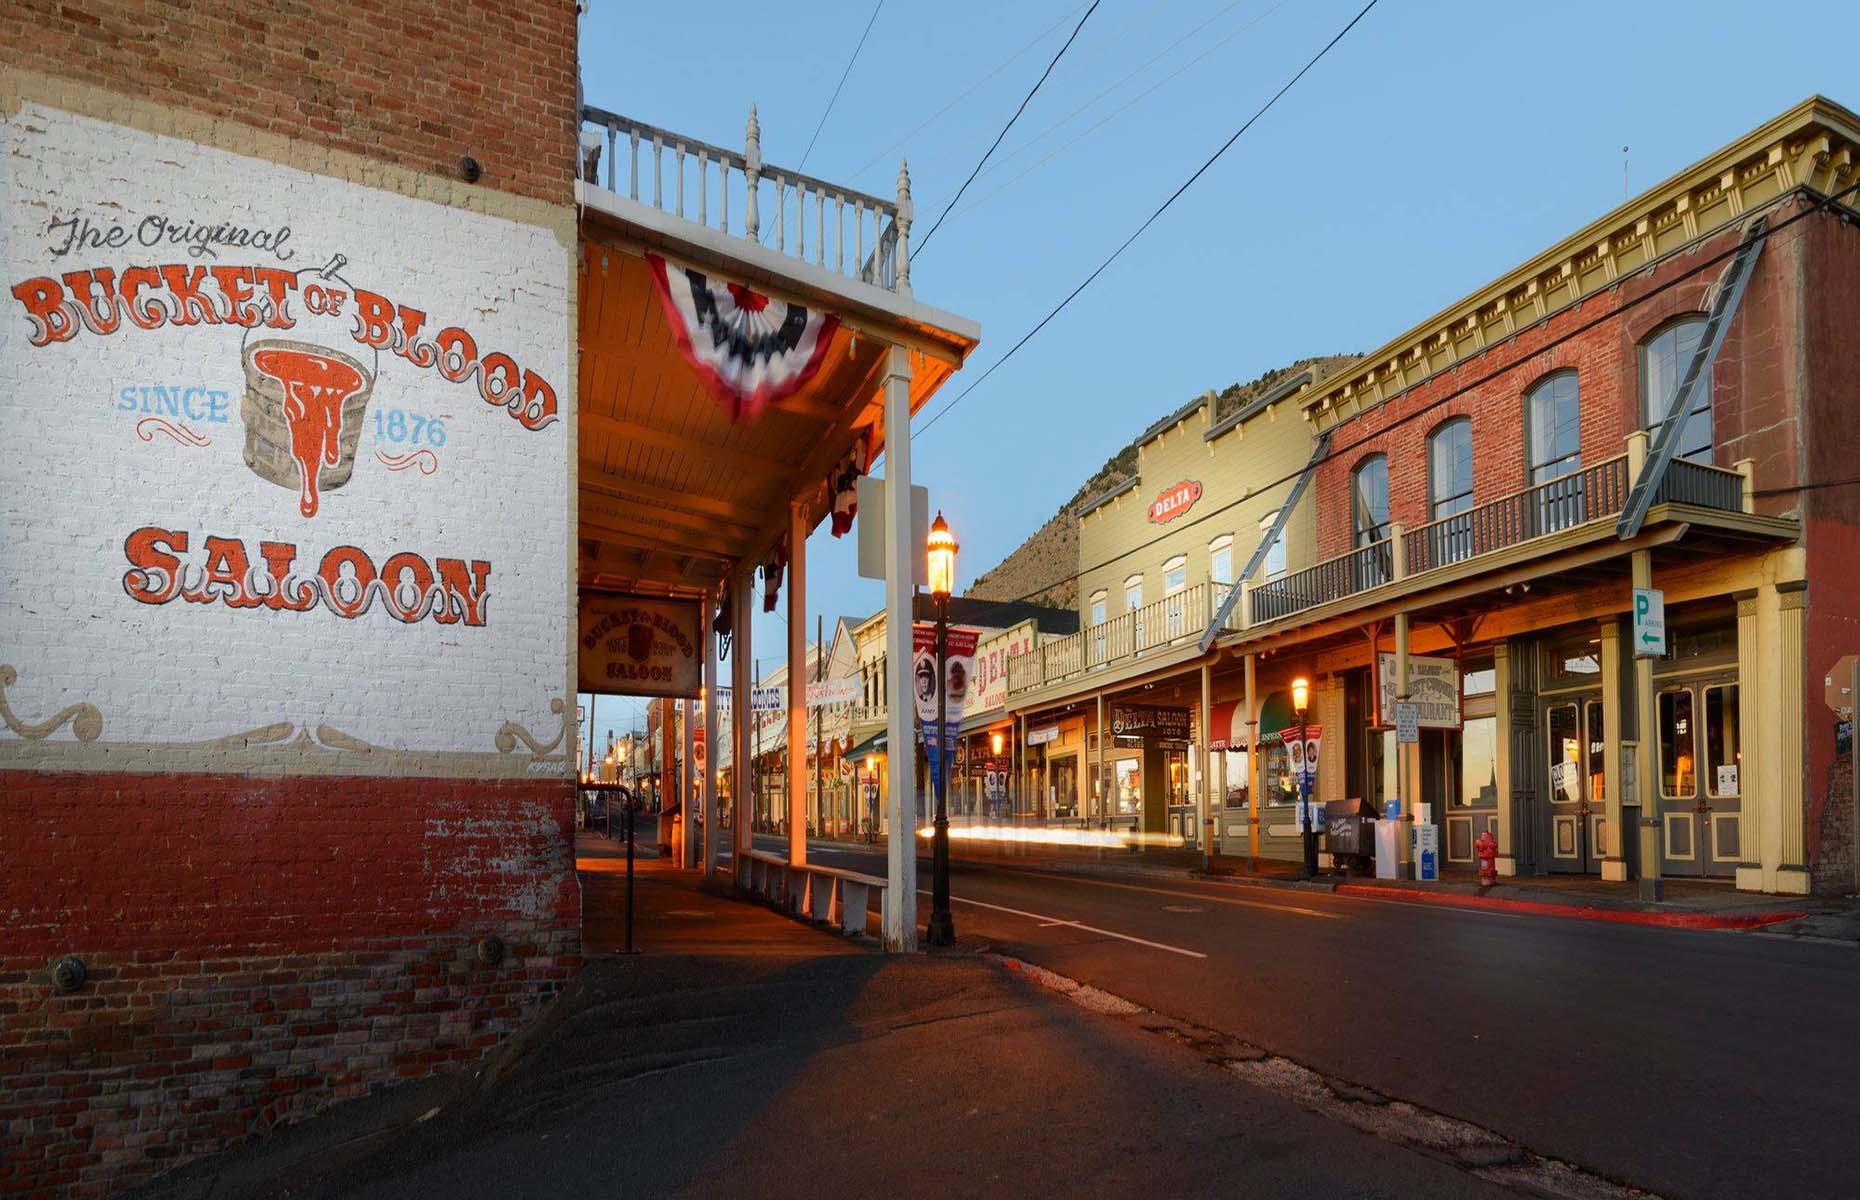 Slide 44 of 46: Virginia City was a boomtown which sprang into existence in 1859 after the discovery of a significant vein of silver in the Nevada Desert. In its peak in the mid-1870s it had around 25,000 residents. The mines' output dwindled after 1878 and the city itself declined as a result.